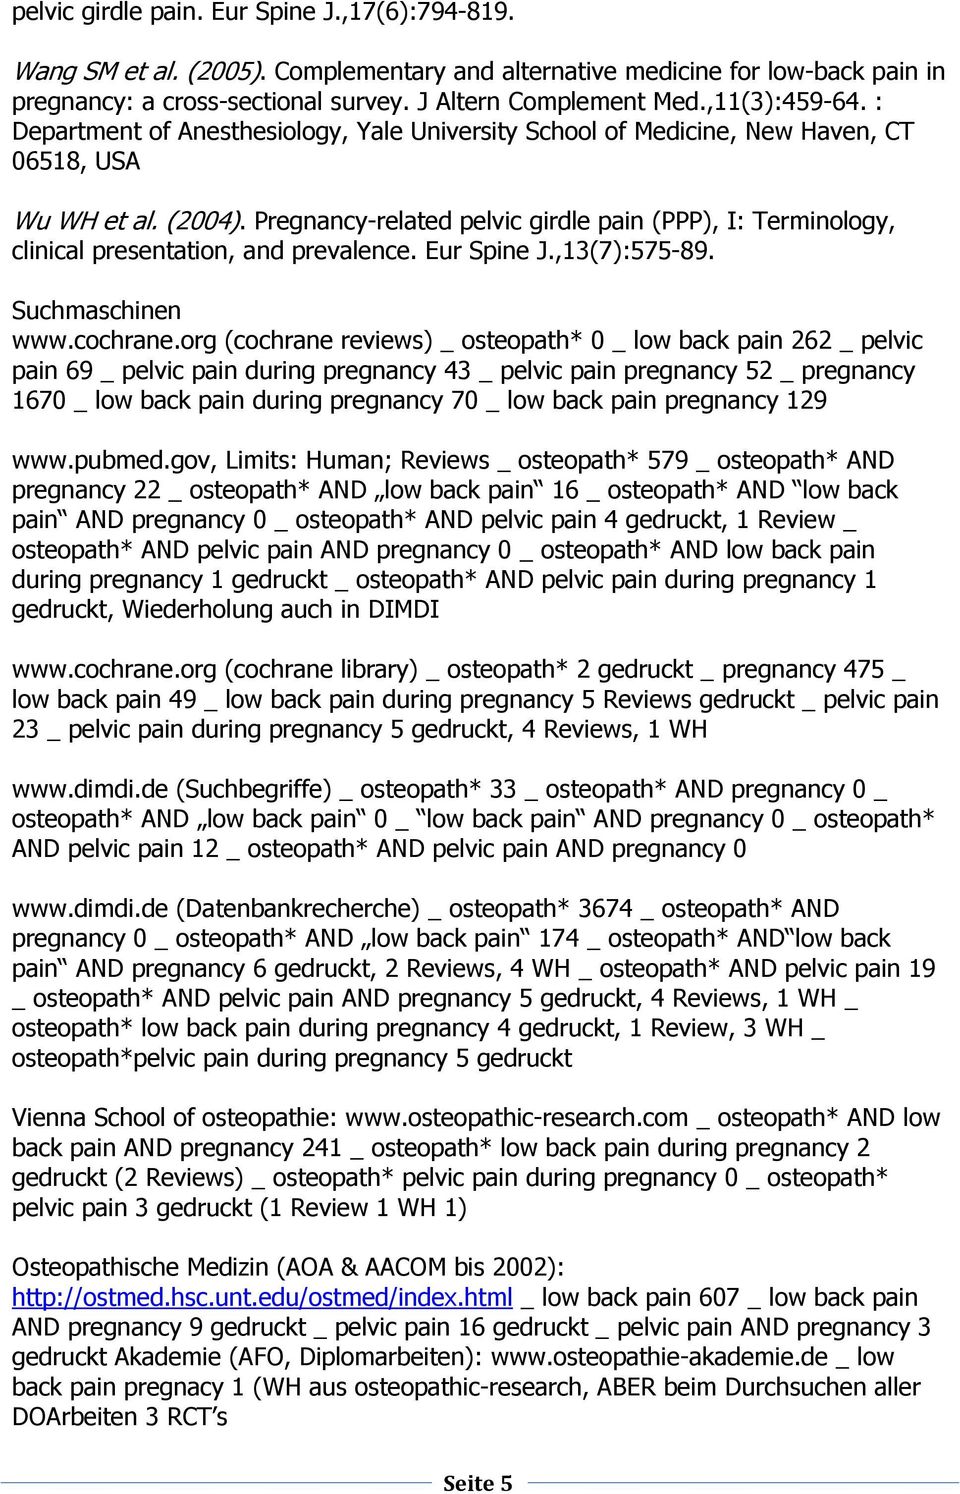 Pregnancy-related pelvic girdle pain (PPP), I: Terminology, clinical presentation, and prevalence. Eur Spine J.,13(7):575-89. Suchmaschinen www.cochrane.